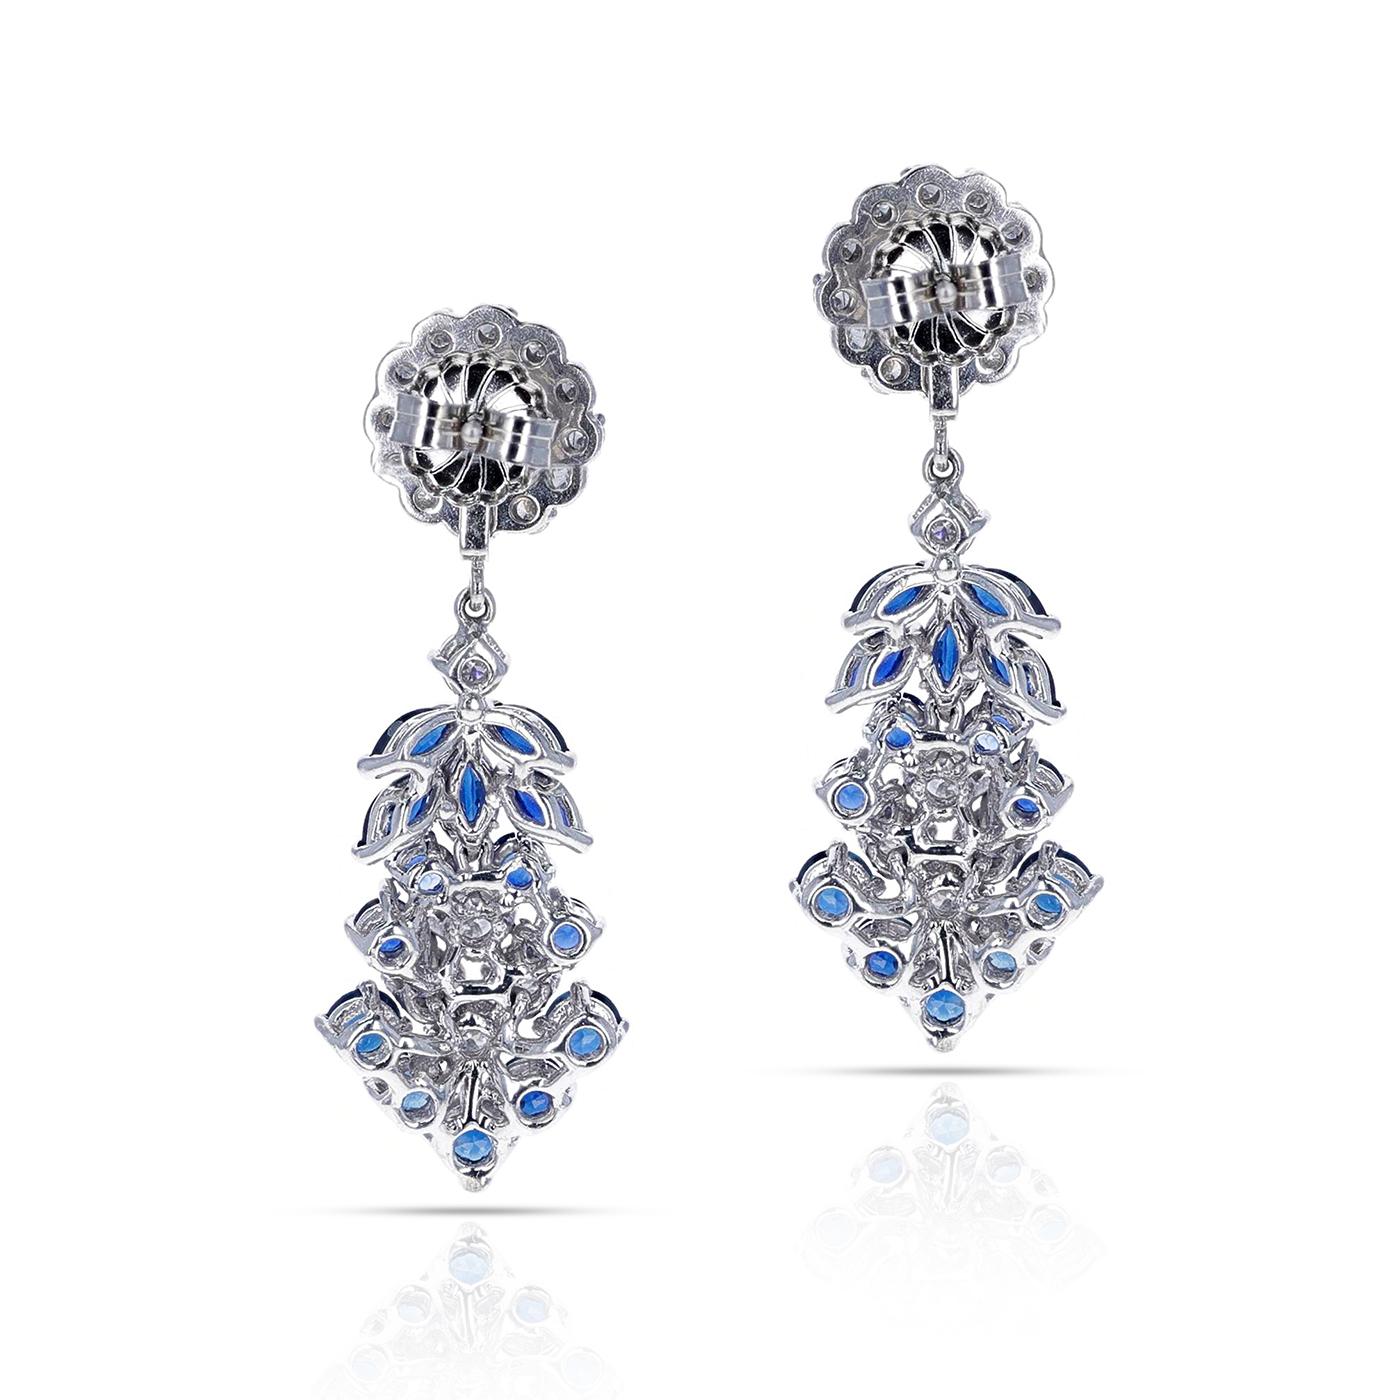 Round Cut 2 Ct. Round Diamond and 3.50 Ct. Round Sapphire Dangling Cocktail Earrings, 14K